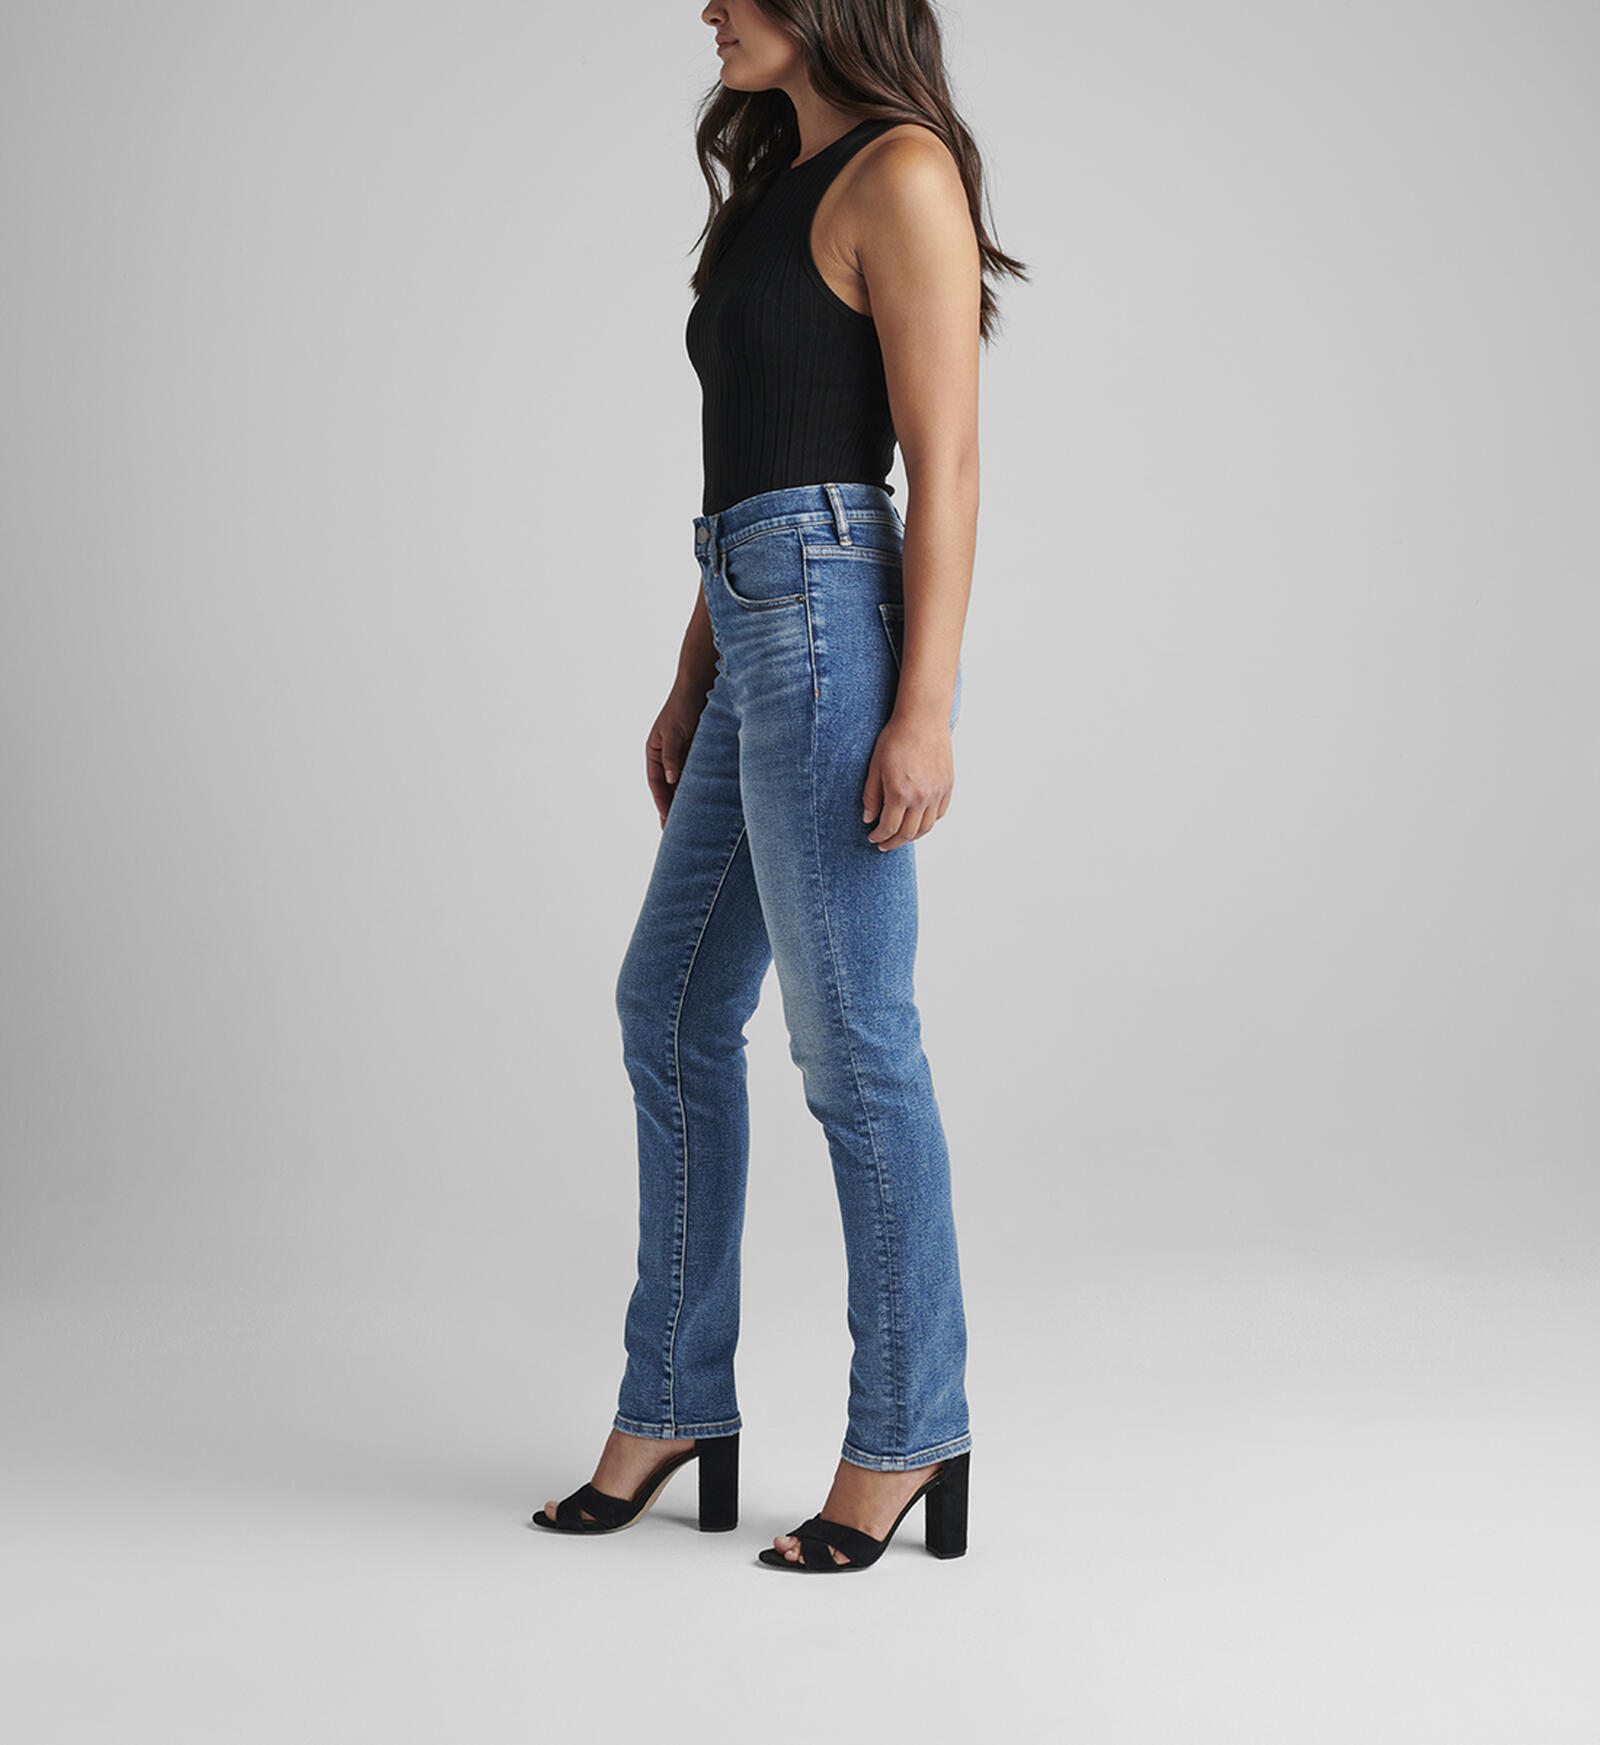 Buy Valentina High Rise Straight Leg Pull-On Jeans for USD 29.00